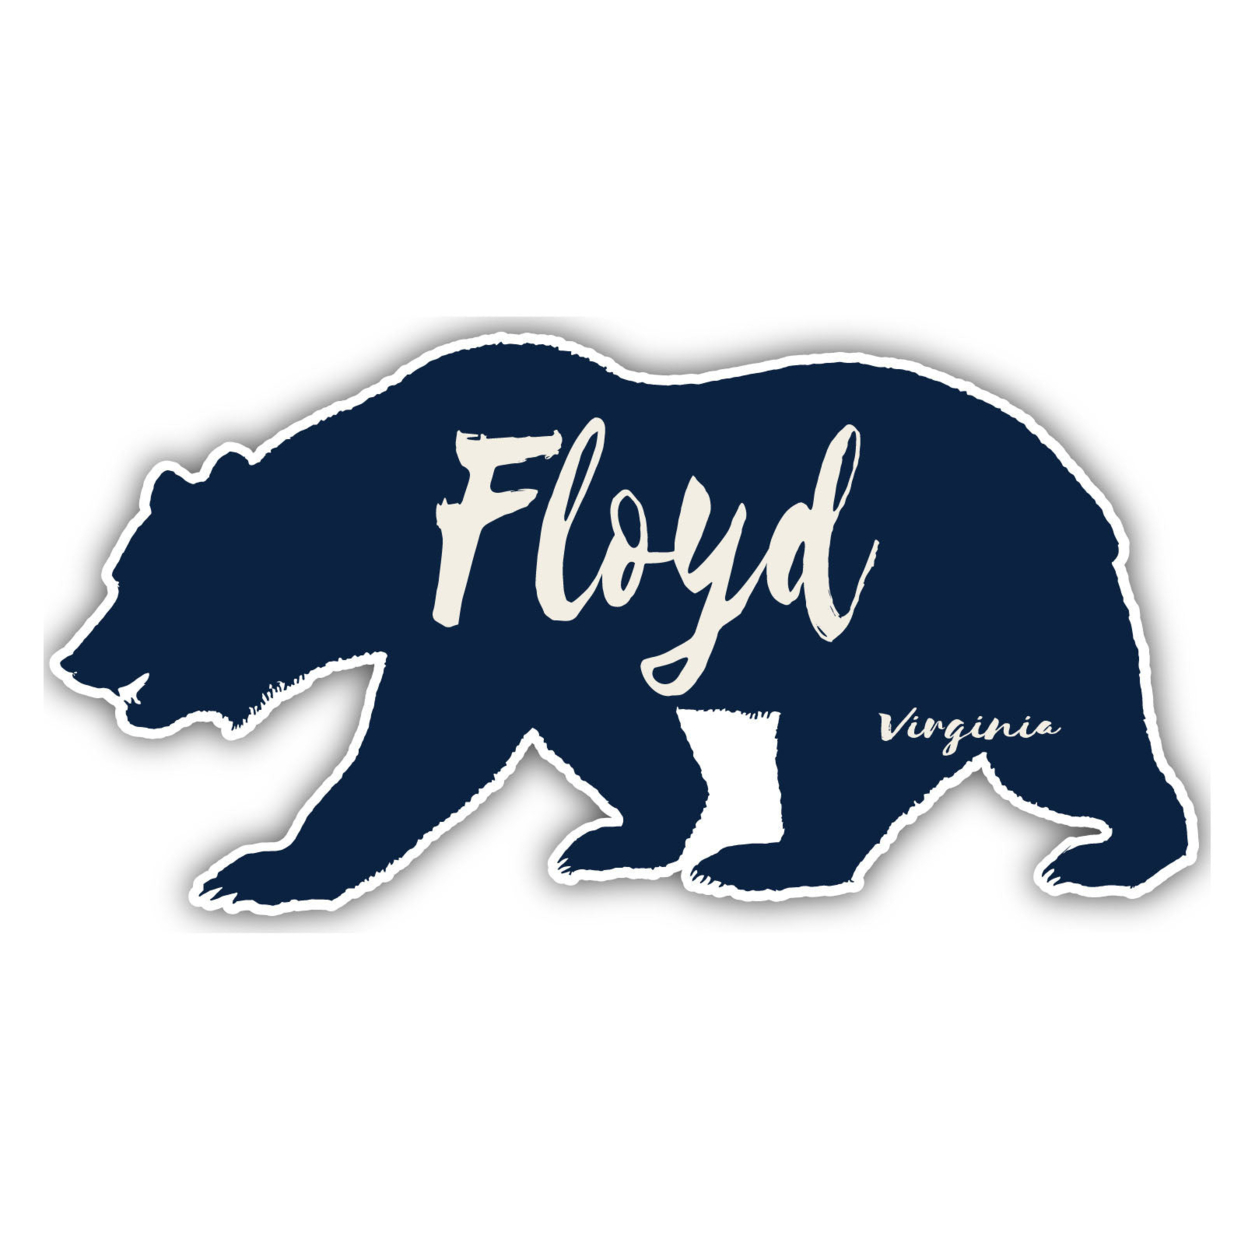 Floyd Virginia Souvenir Decorative Stickers (Choose Theme And Size) - 4-Pack, 2-Inch, Great Outdoors